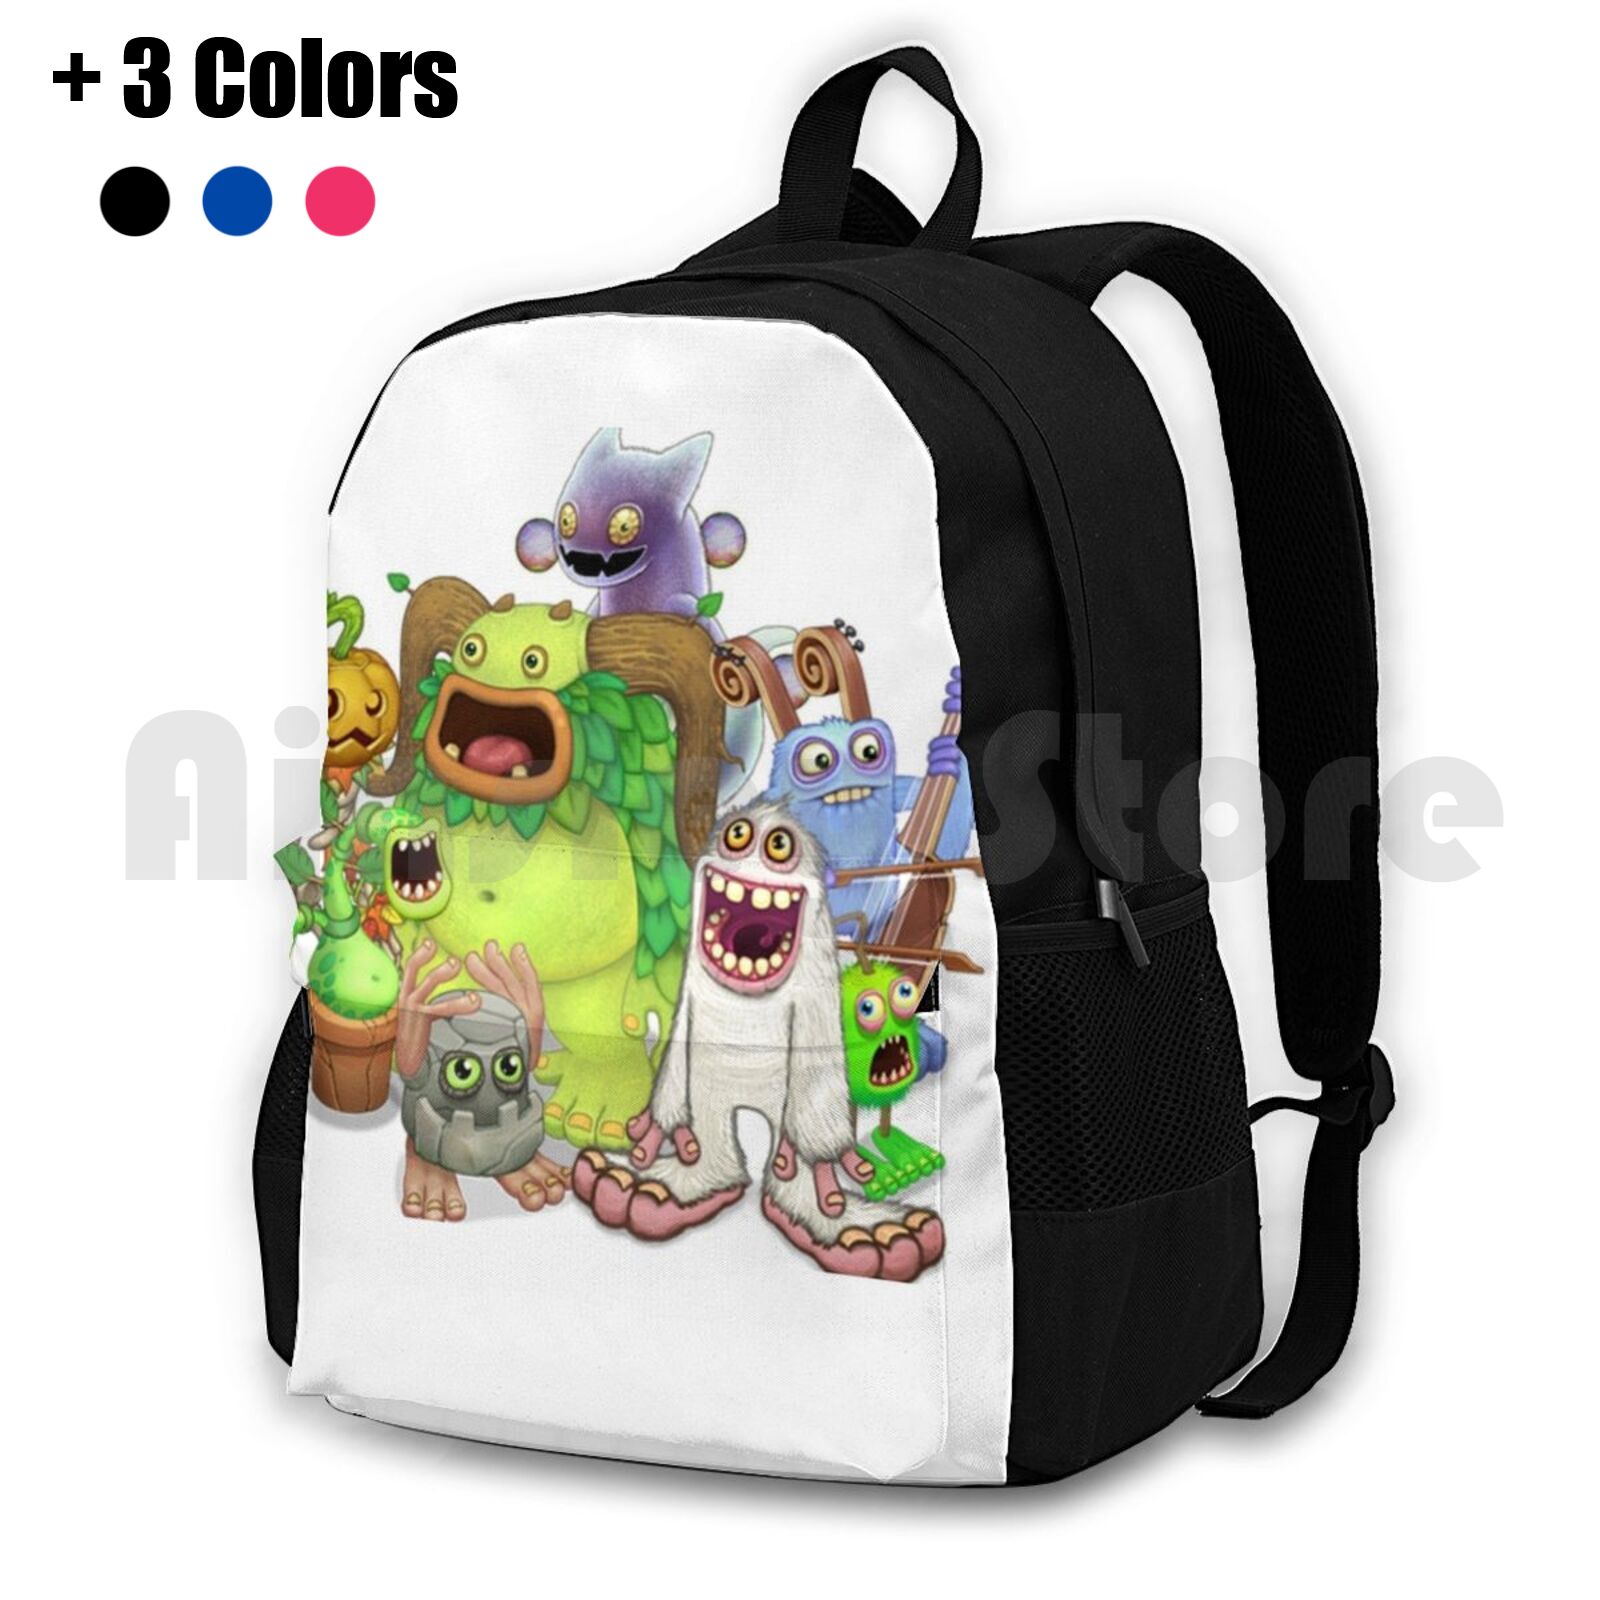 My Singing Monsters Characters Outdoor Hiking Backpack Riding Climbing Sports Bag My Singing Monsters My Singing - My Singing Monsters Plush